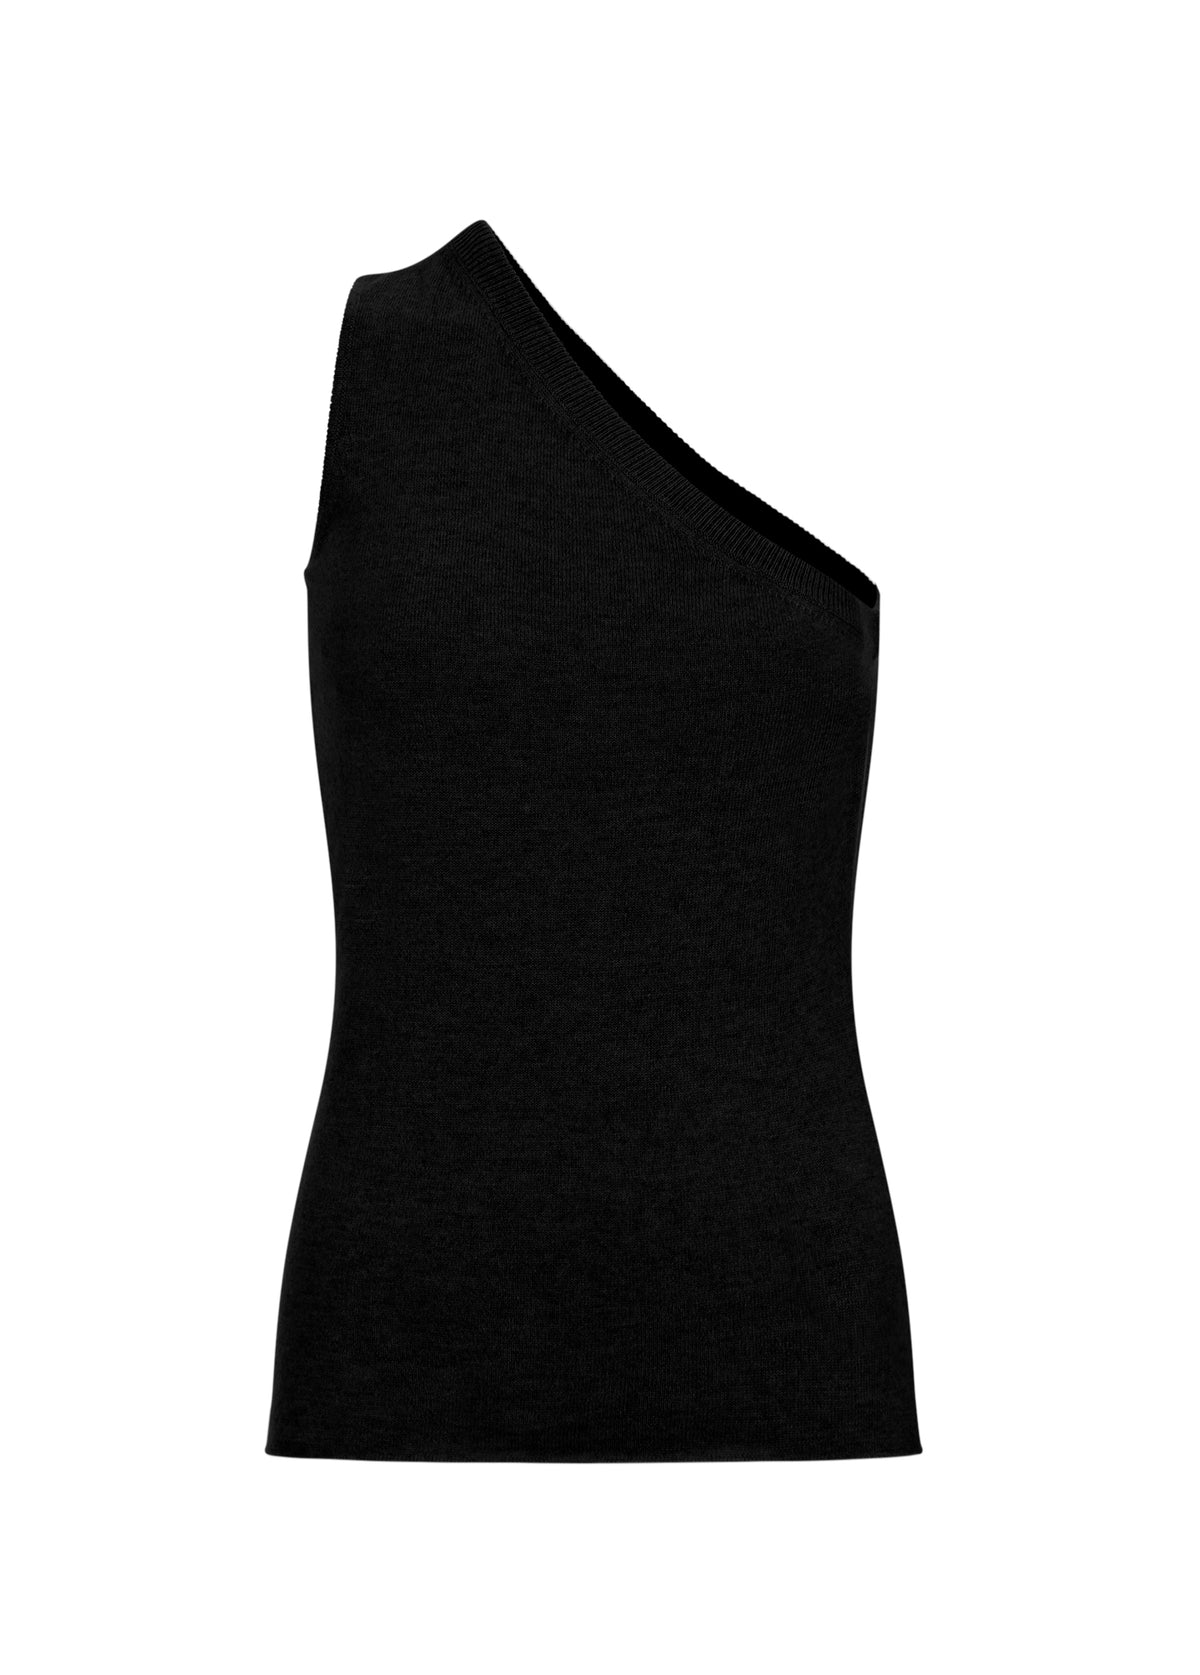 Black cashmere one shoulder sleeveless womens top